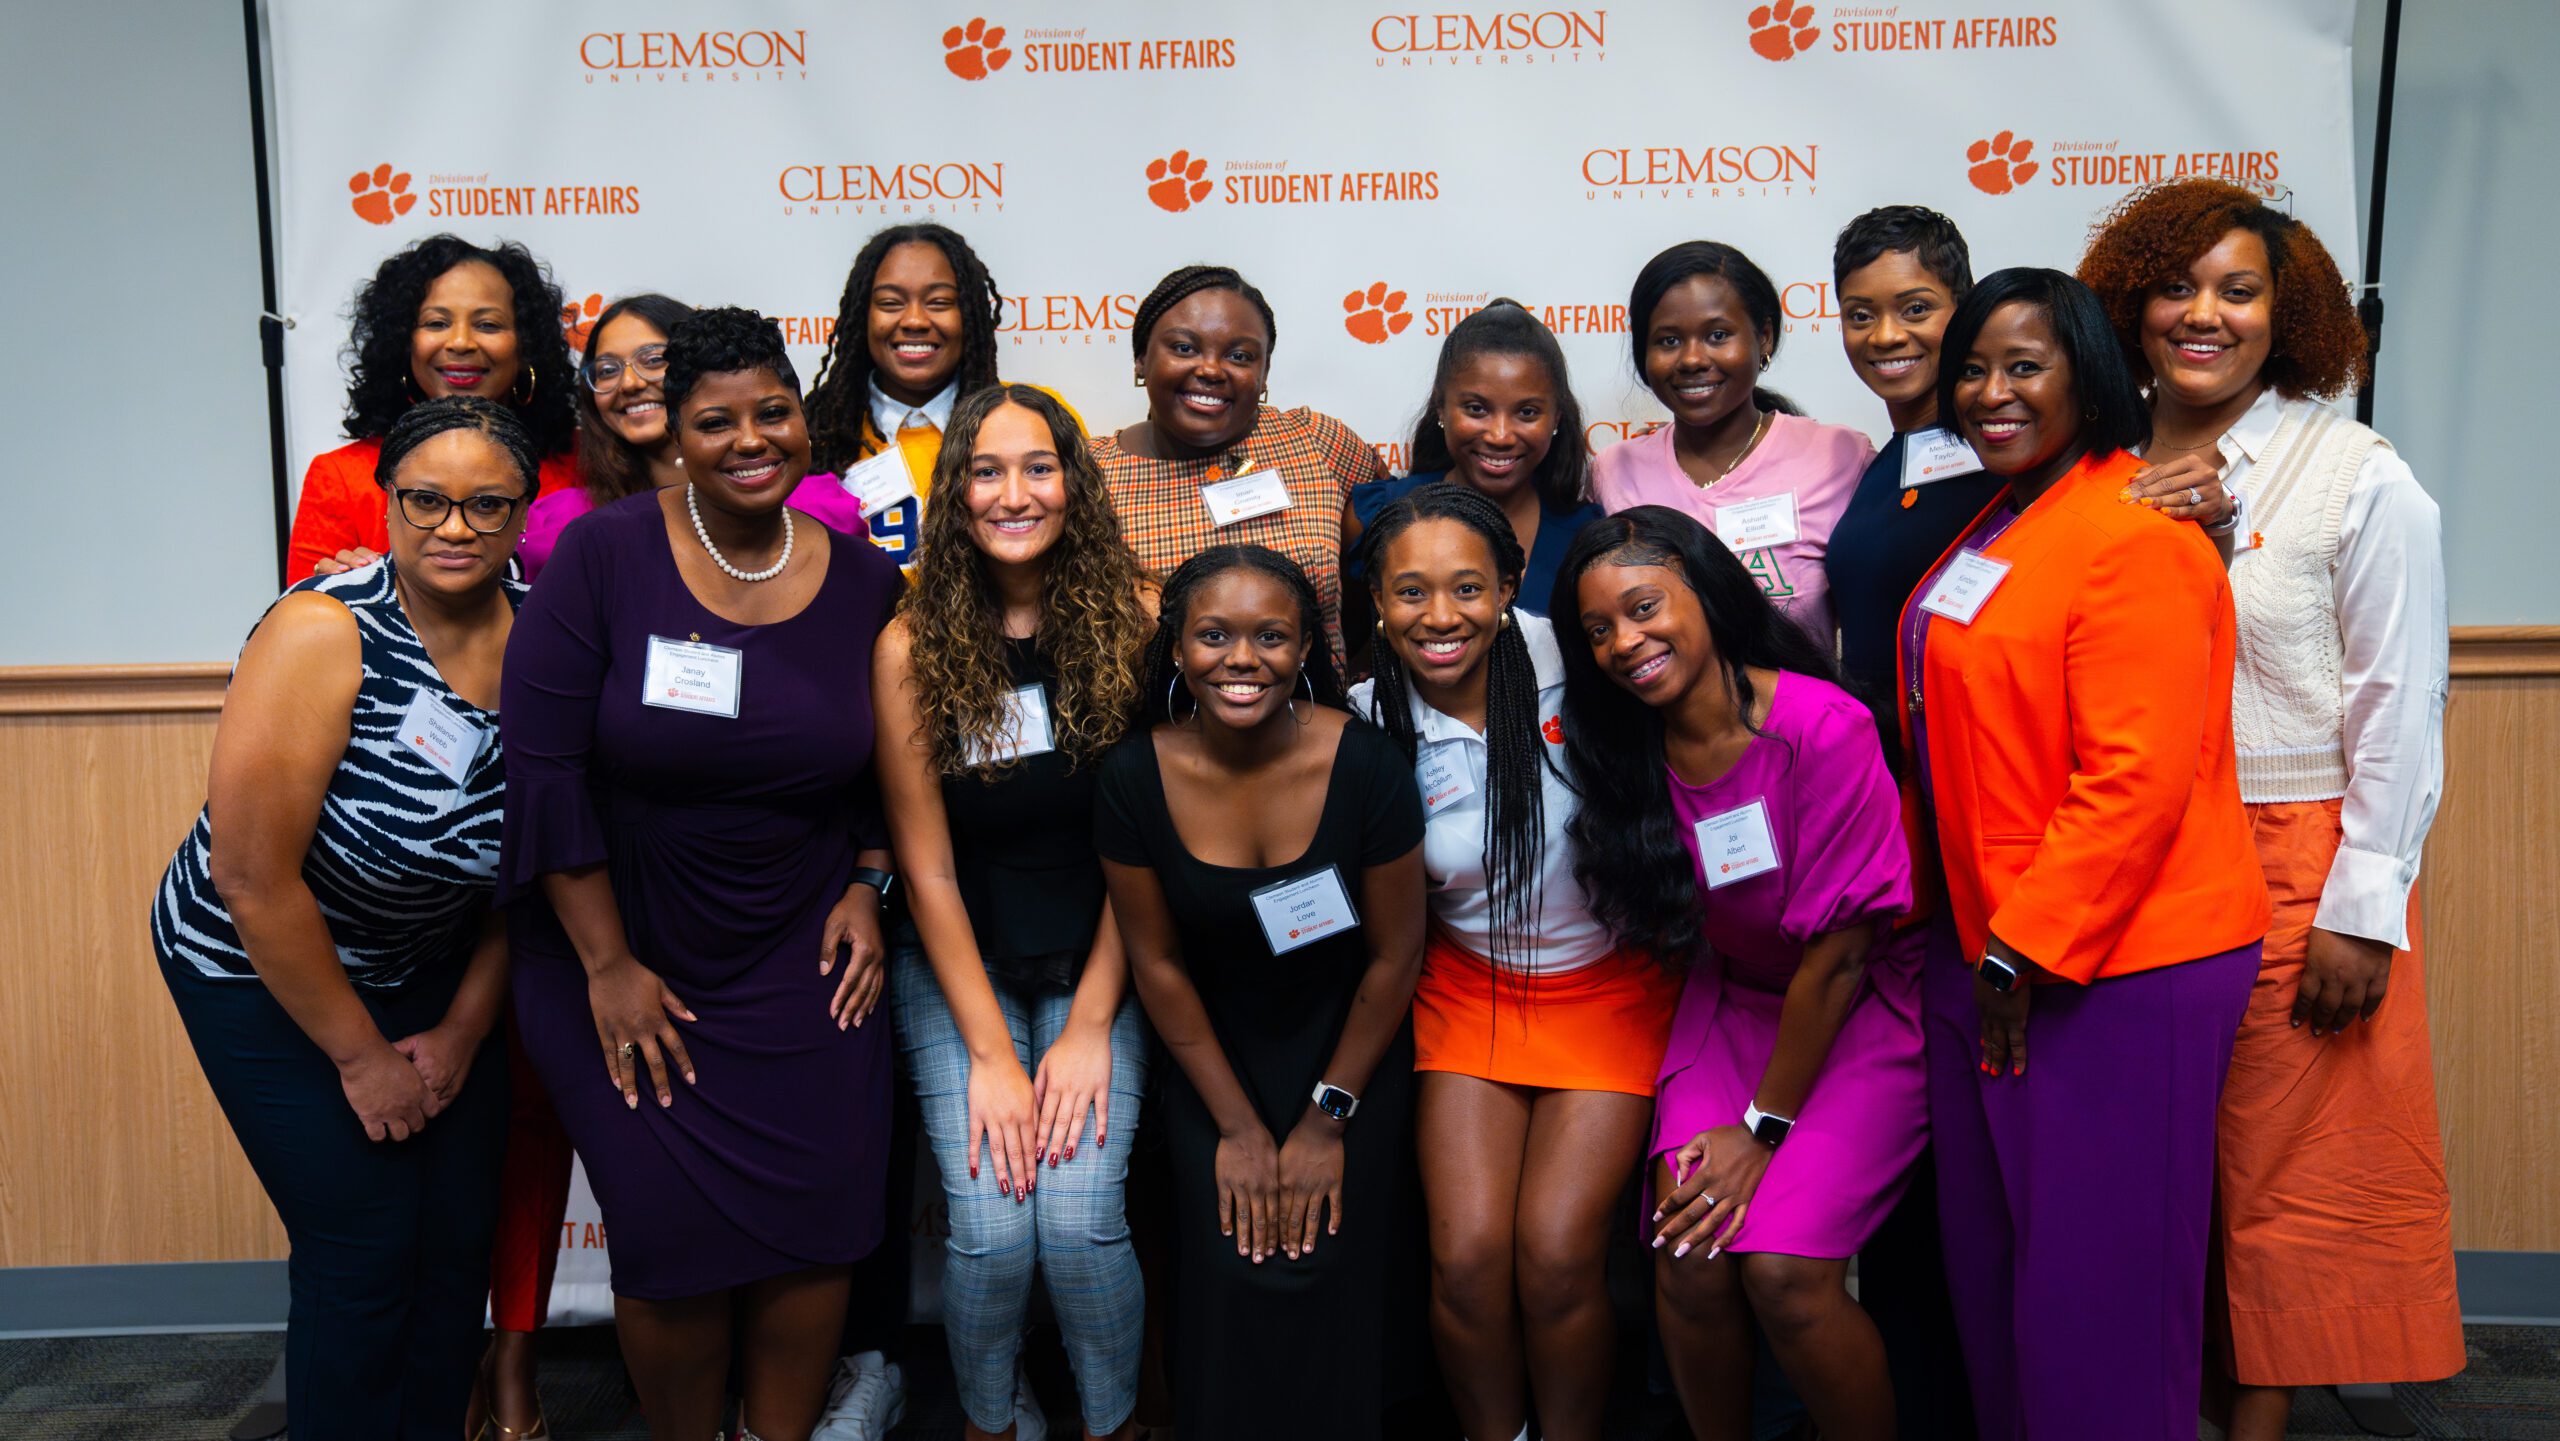 Students and alumni gathered in Hendrix Center on Friday, Oct. 6 for an engagement luncheon